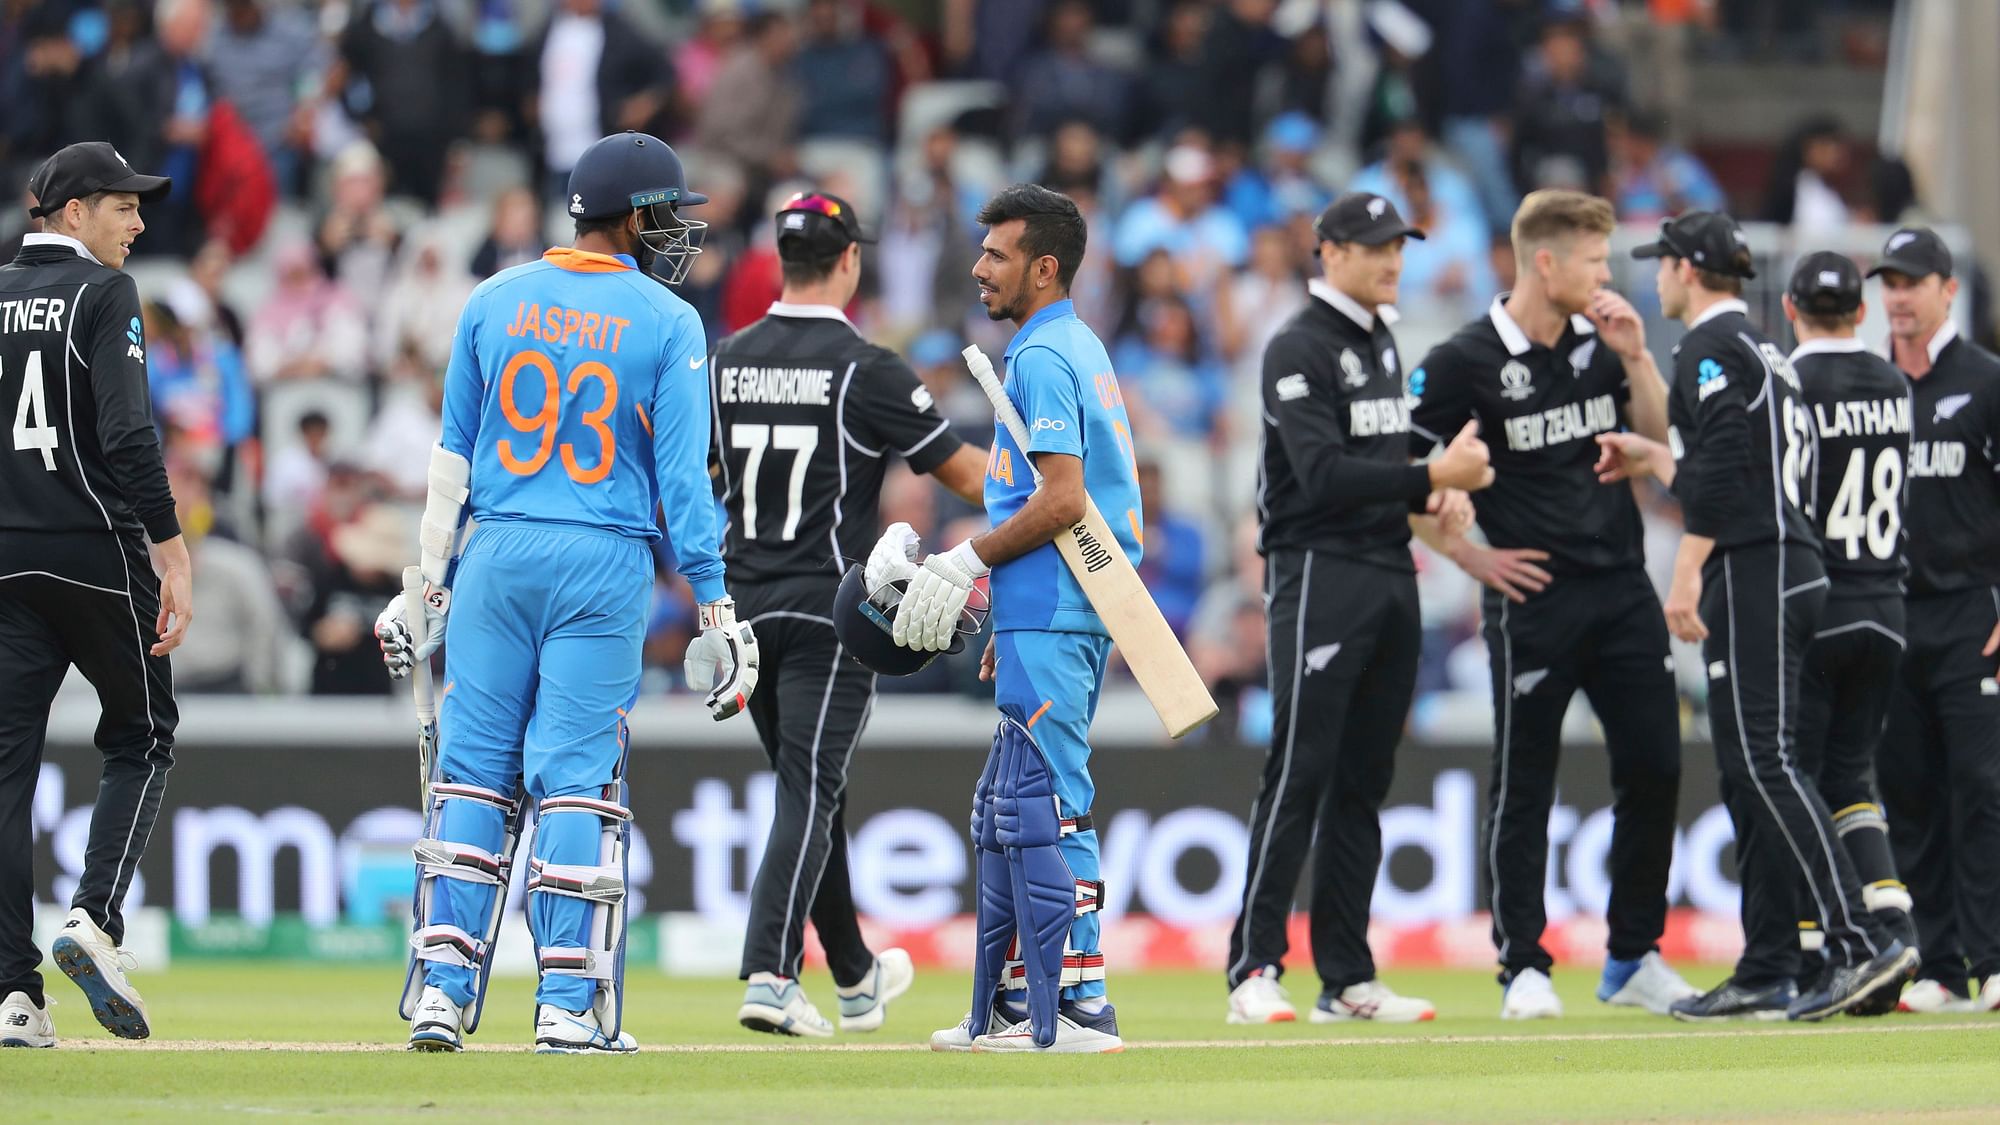 New Zealand beat India by 18 runs in the semifinal.